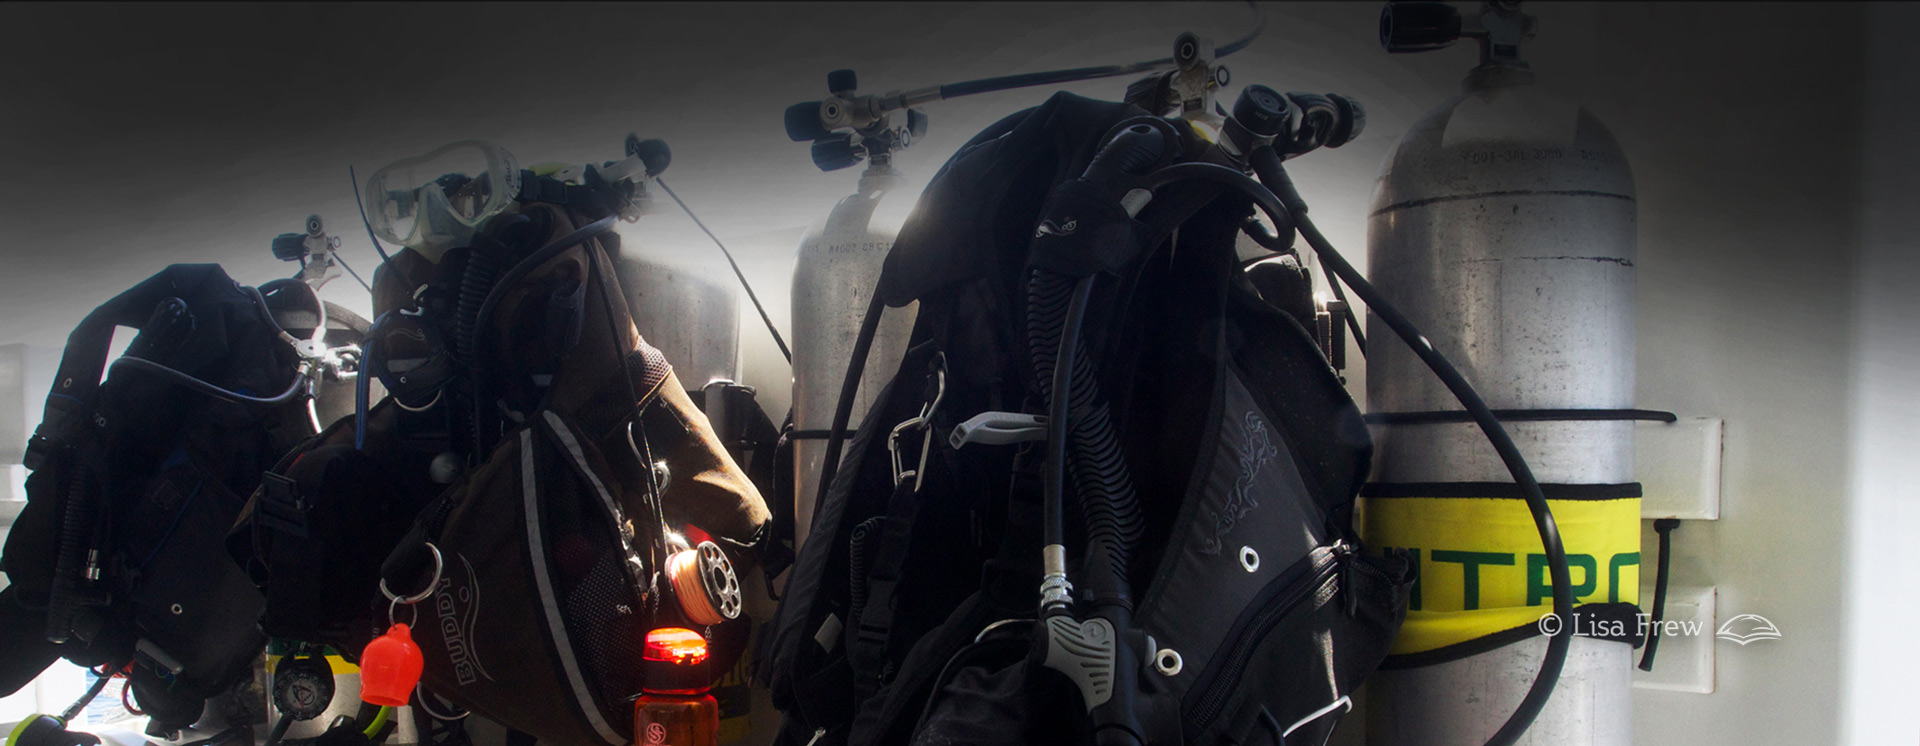 Image of equipment for PADI nitrox specialty course